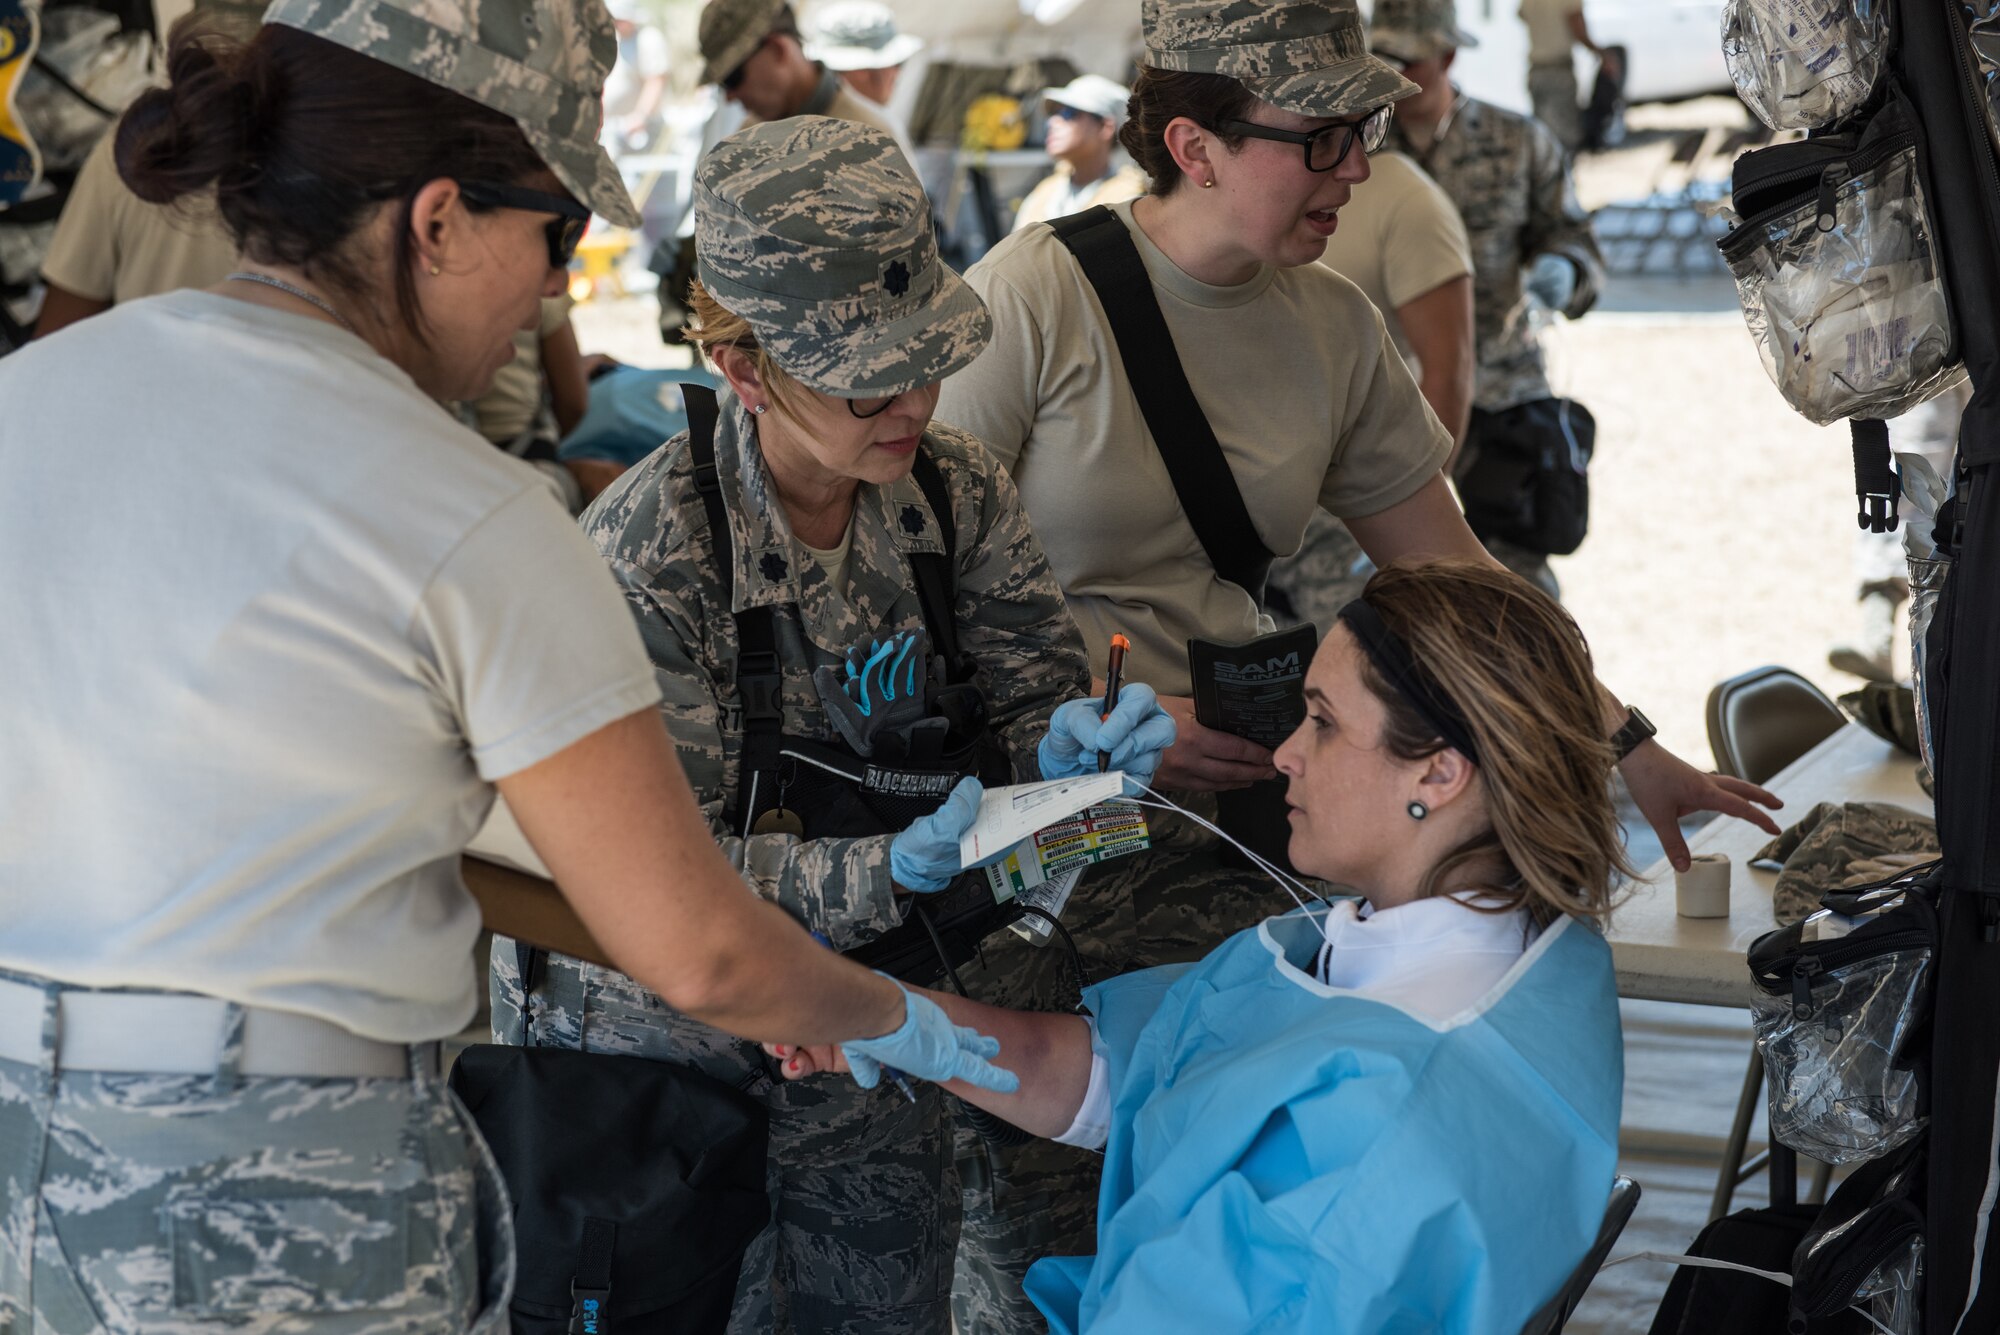 U.S. Airmen with the 156th Medical Group, Puerto Rico Air National Guard and the 193rd Special Operations Medical Group Detachment 1, Pennsylvania ANG, provide treatment for a casualty actor during exercise Vigilant Guard.